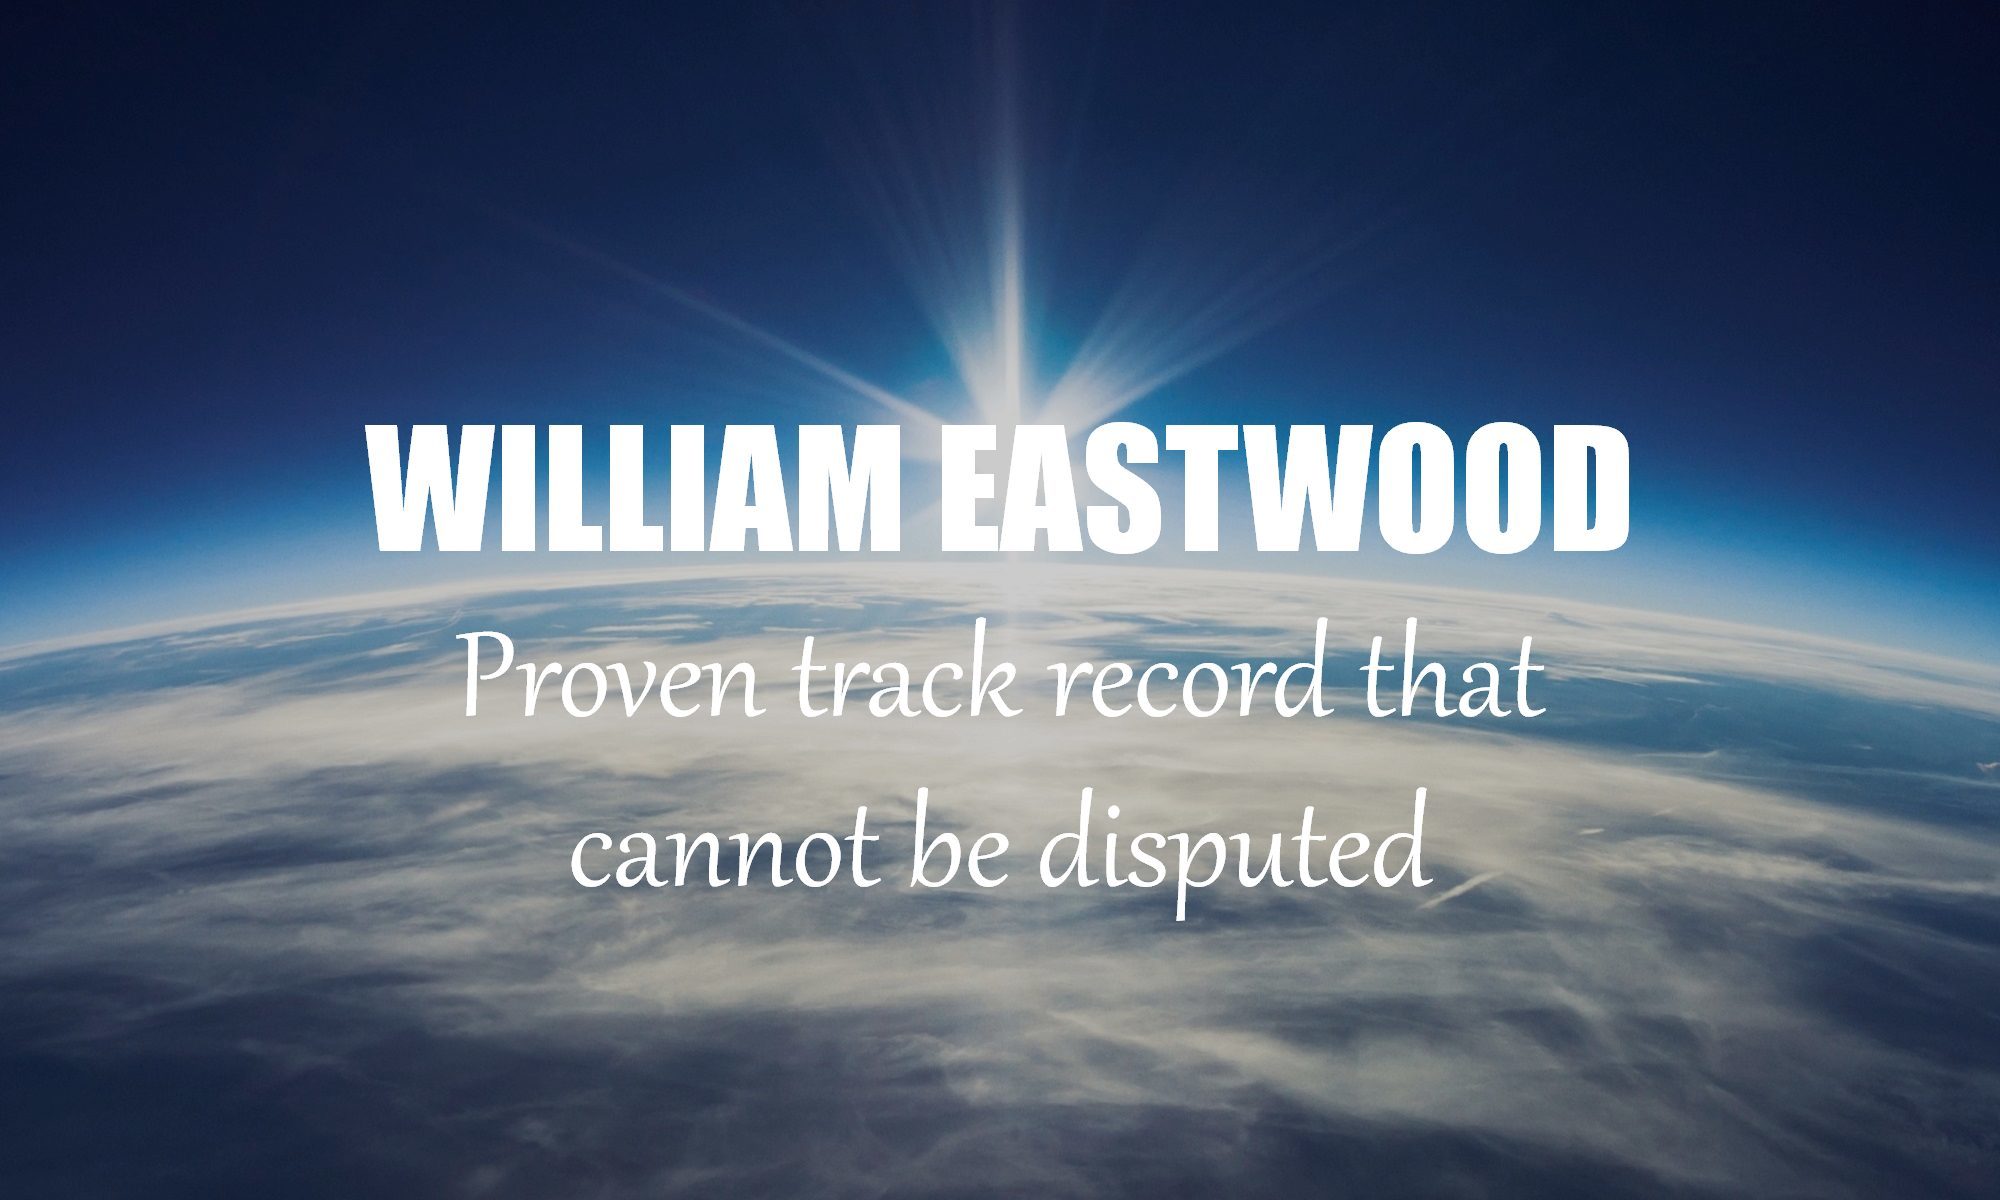 WILLIAM EASTWOOD-Author-Publisher-Biography-True-Facts-Altruistic-Humanitarian-Efforts-to-Assist-Humanity